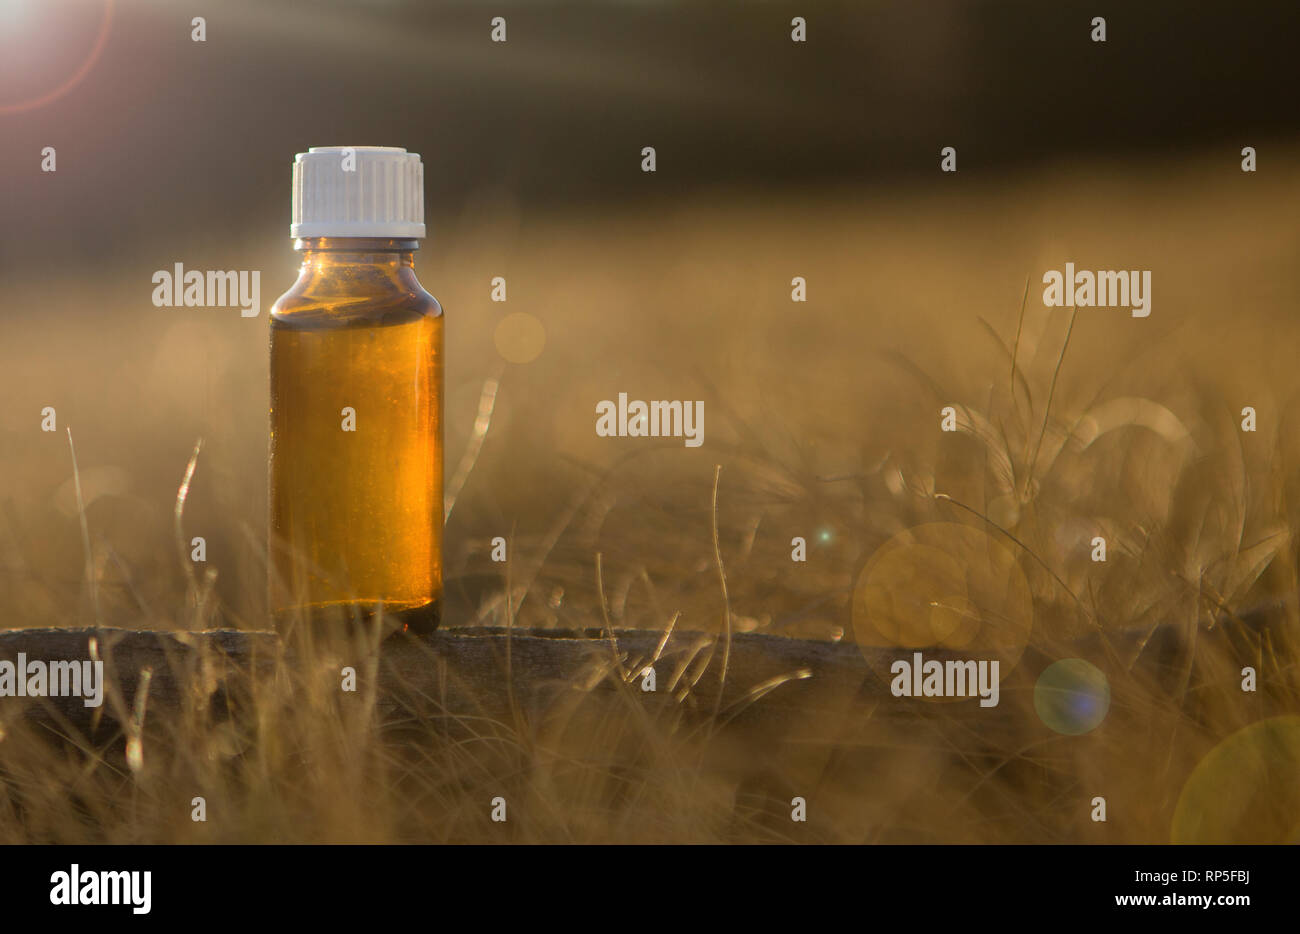 FLORITERAPIA -  Naturopathic Medicine. Herb Therapy, bottle - Essential oil. Stock Photo